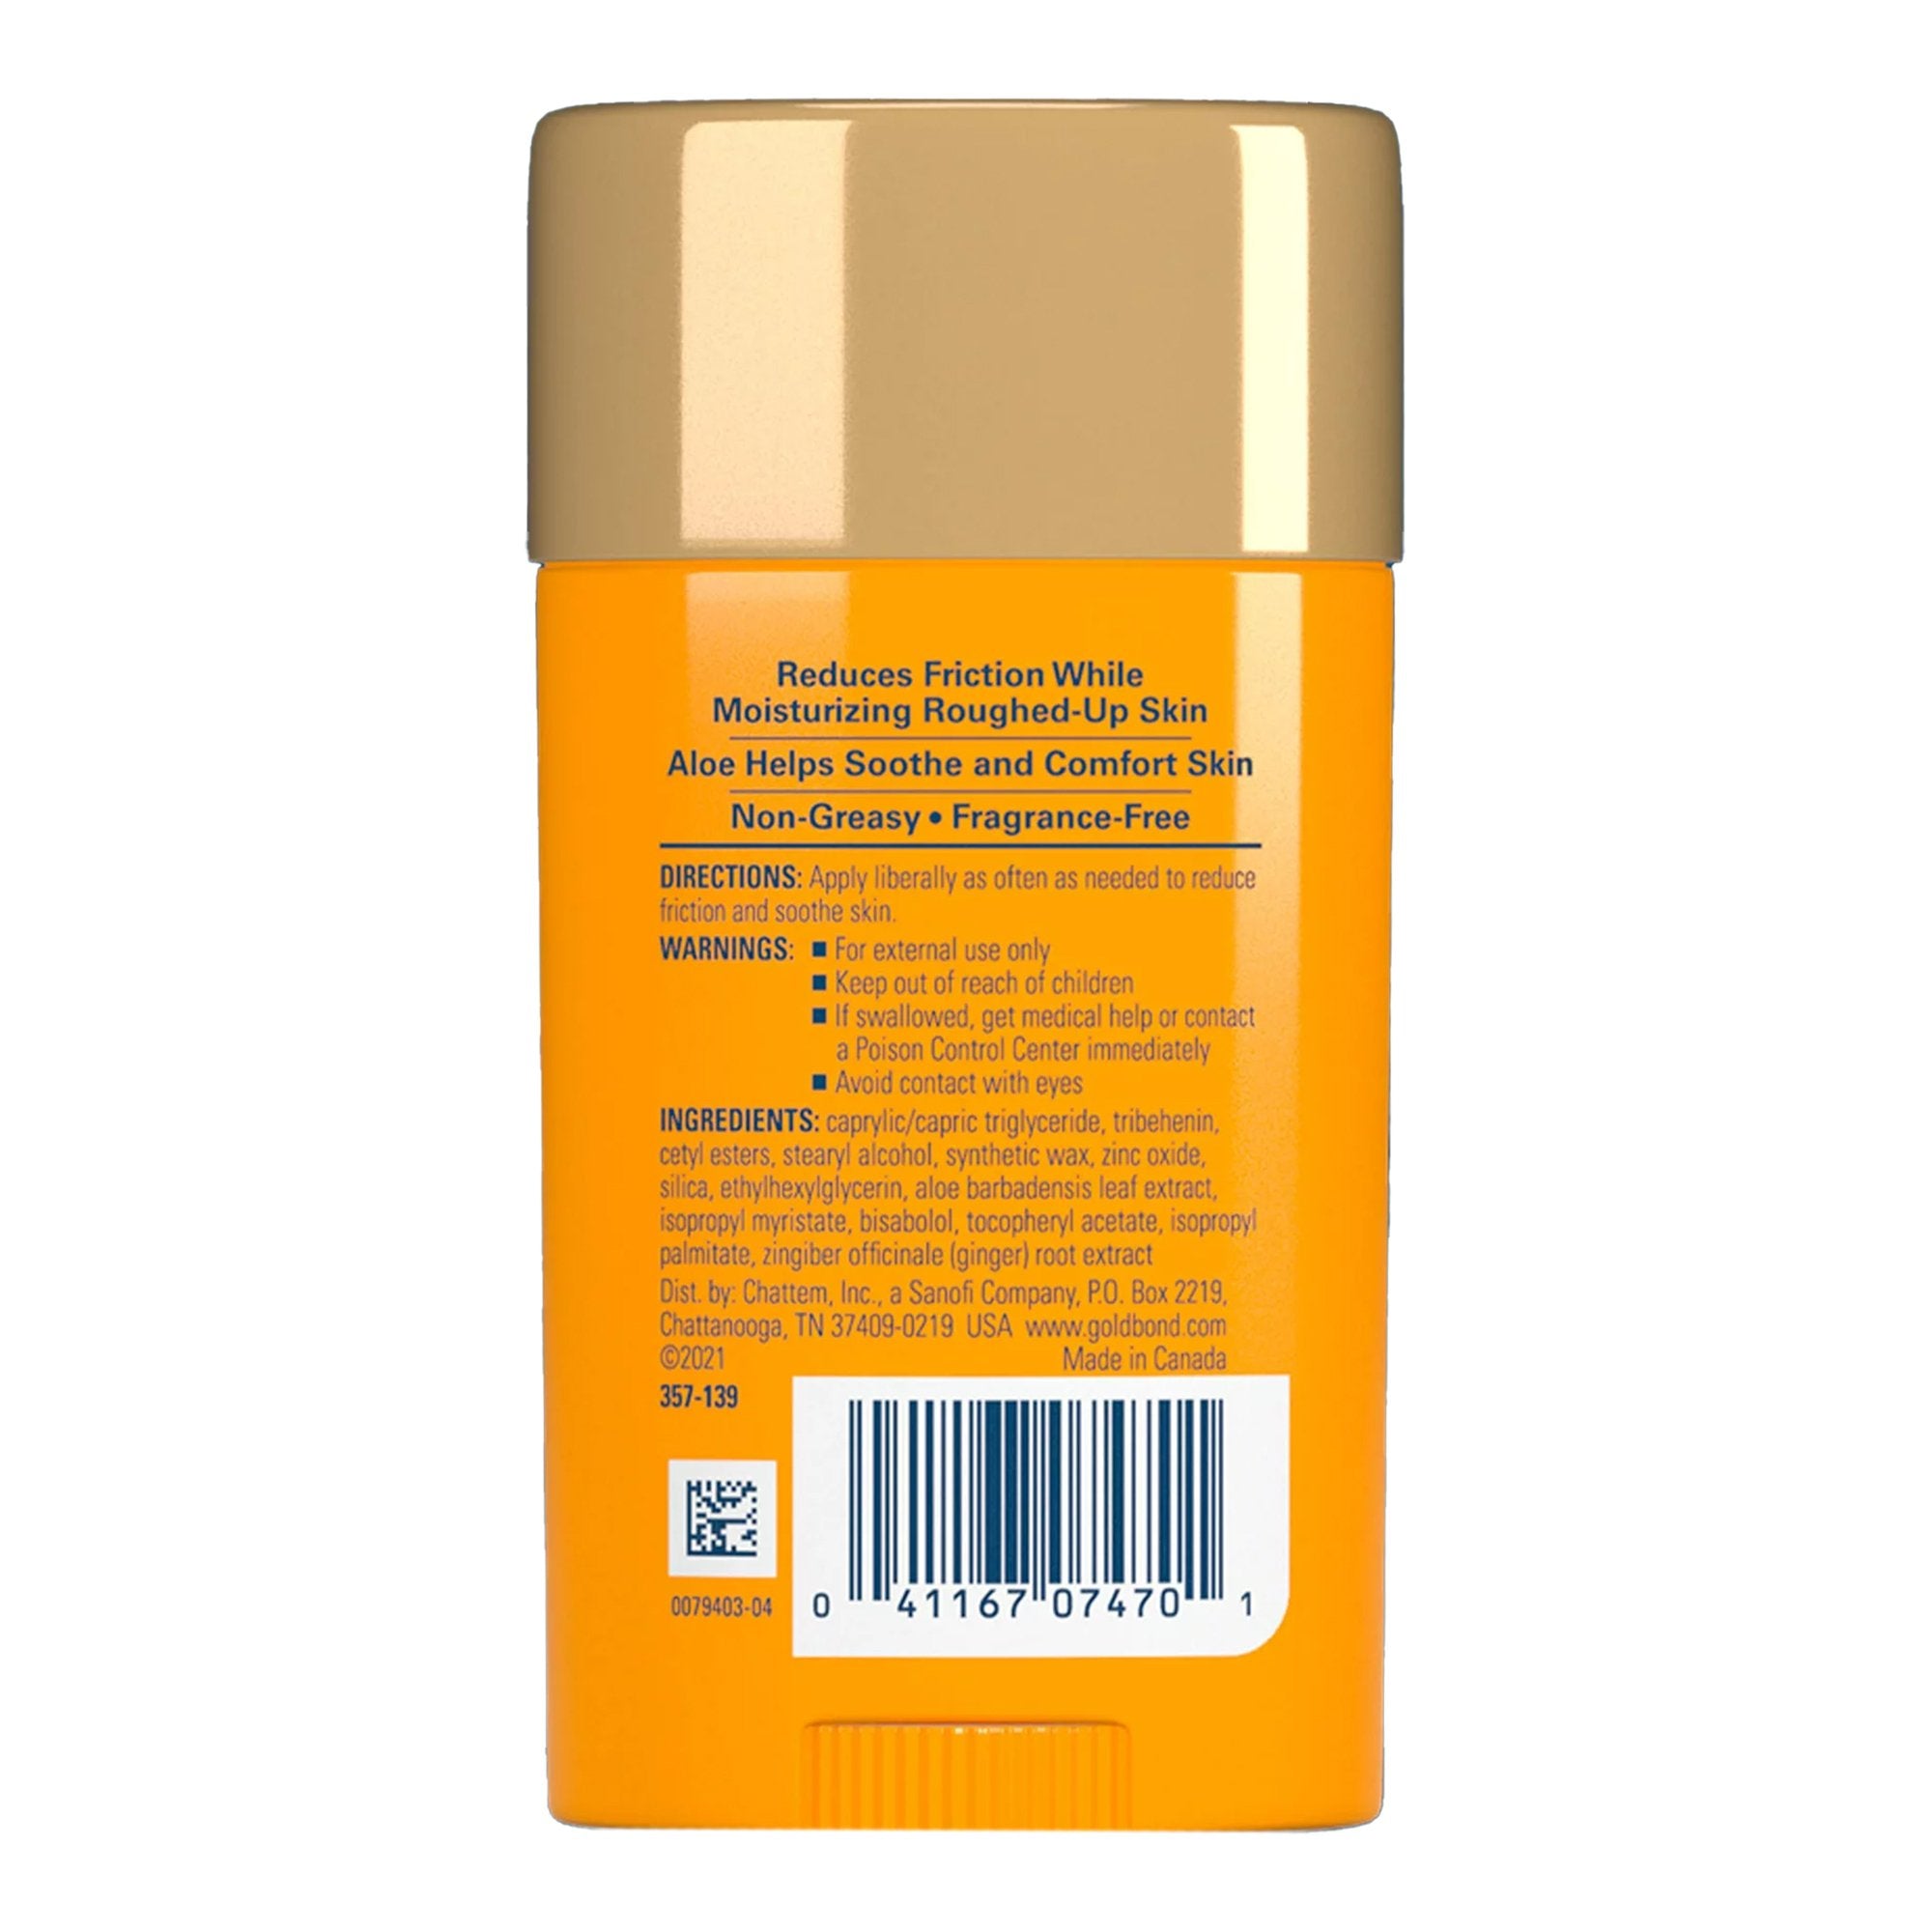 Hand and Body Moisturizer Gold Bond® Friction Defense 1.75 oz. Stick Unscented Solid